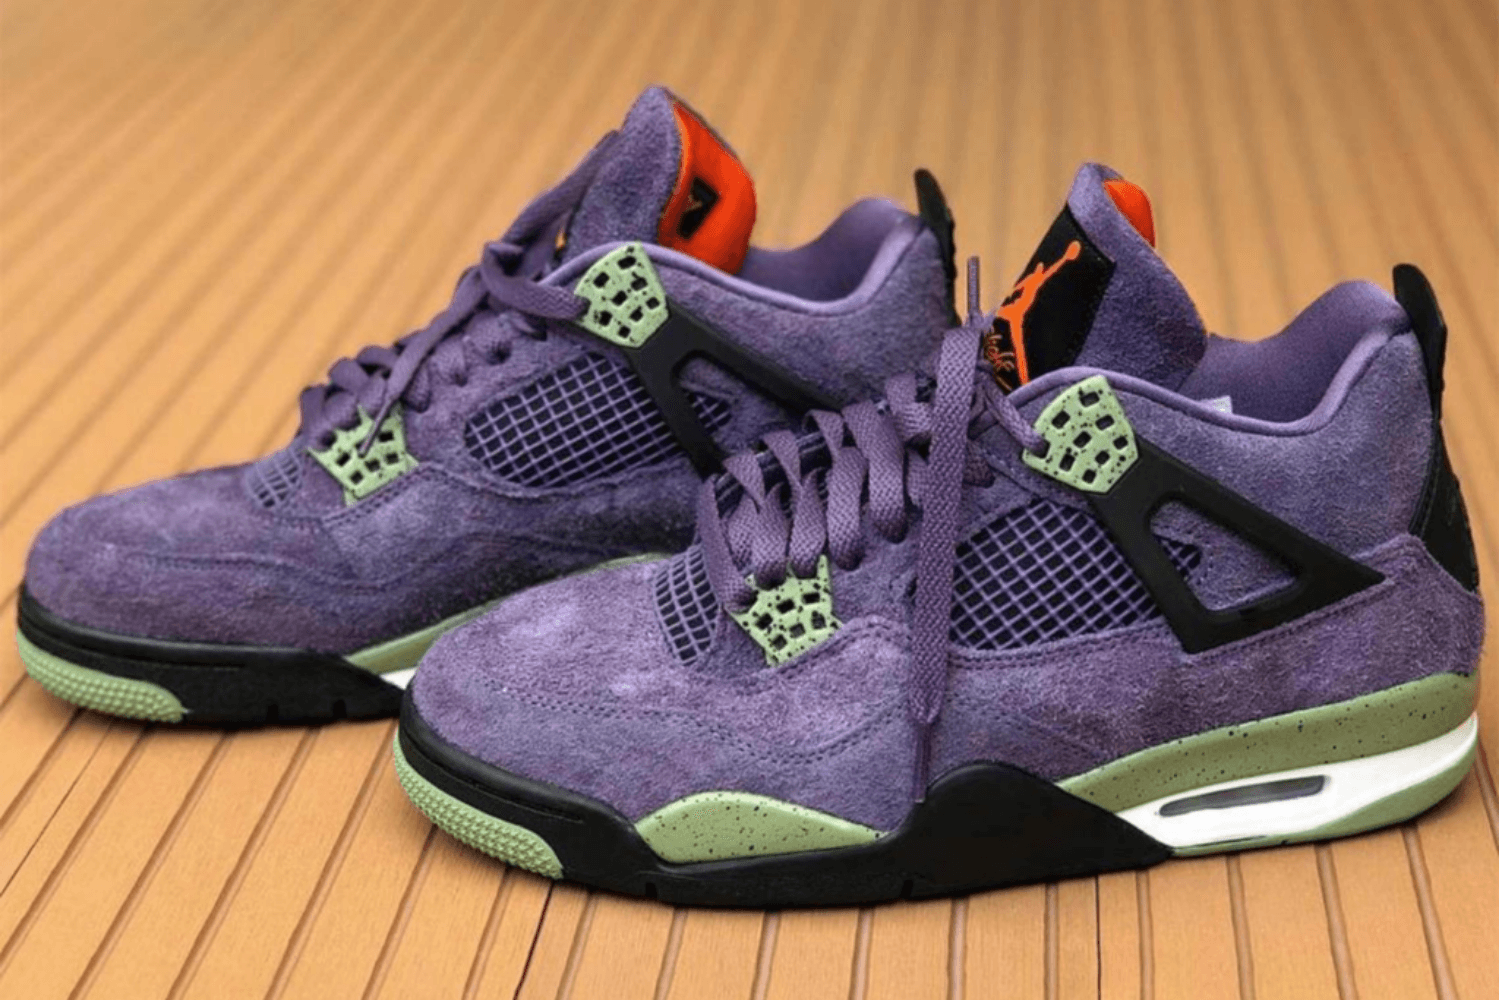 A first look at the Air Jordan 4 WMNS 'Canyon Purple'